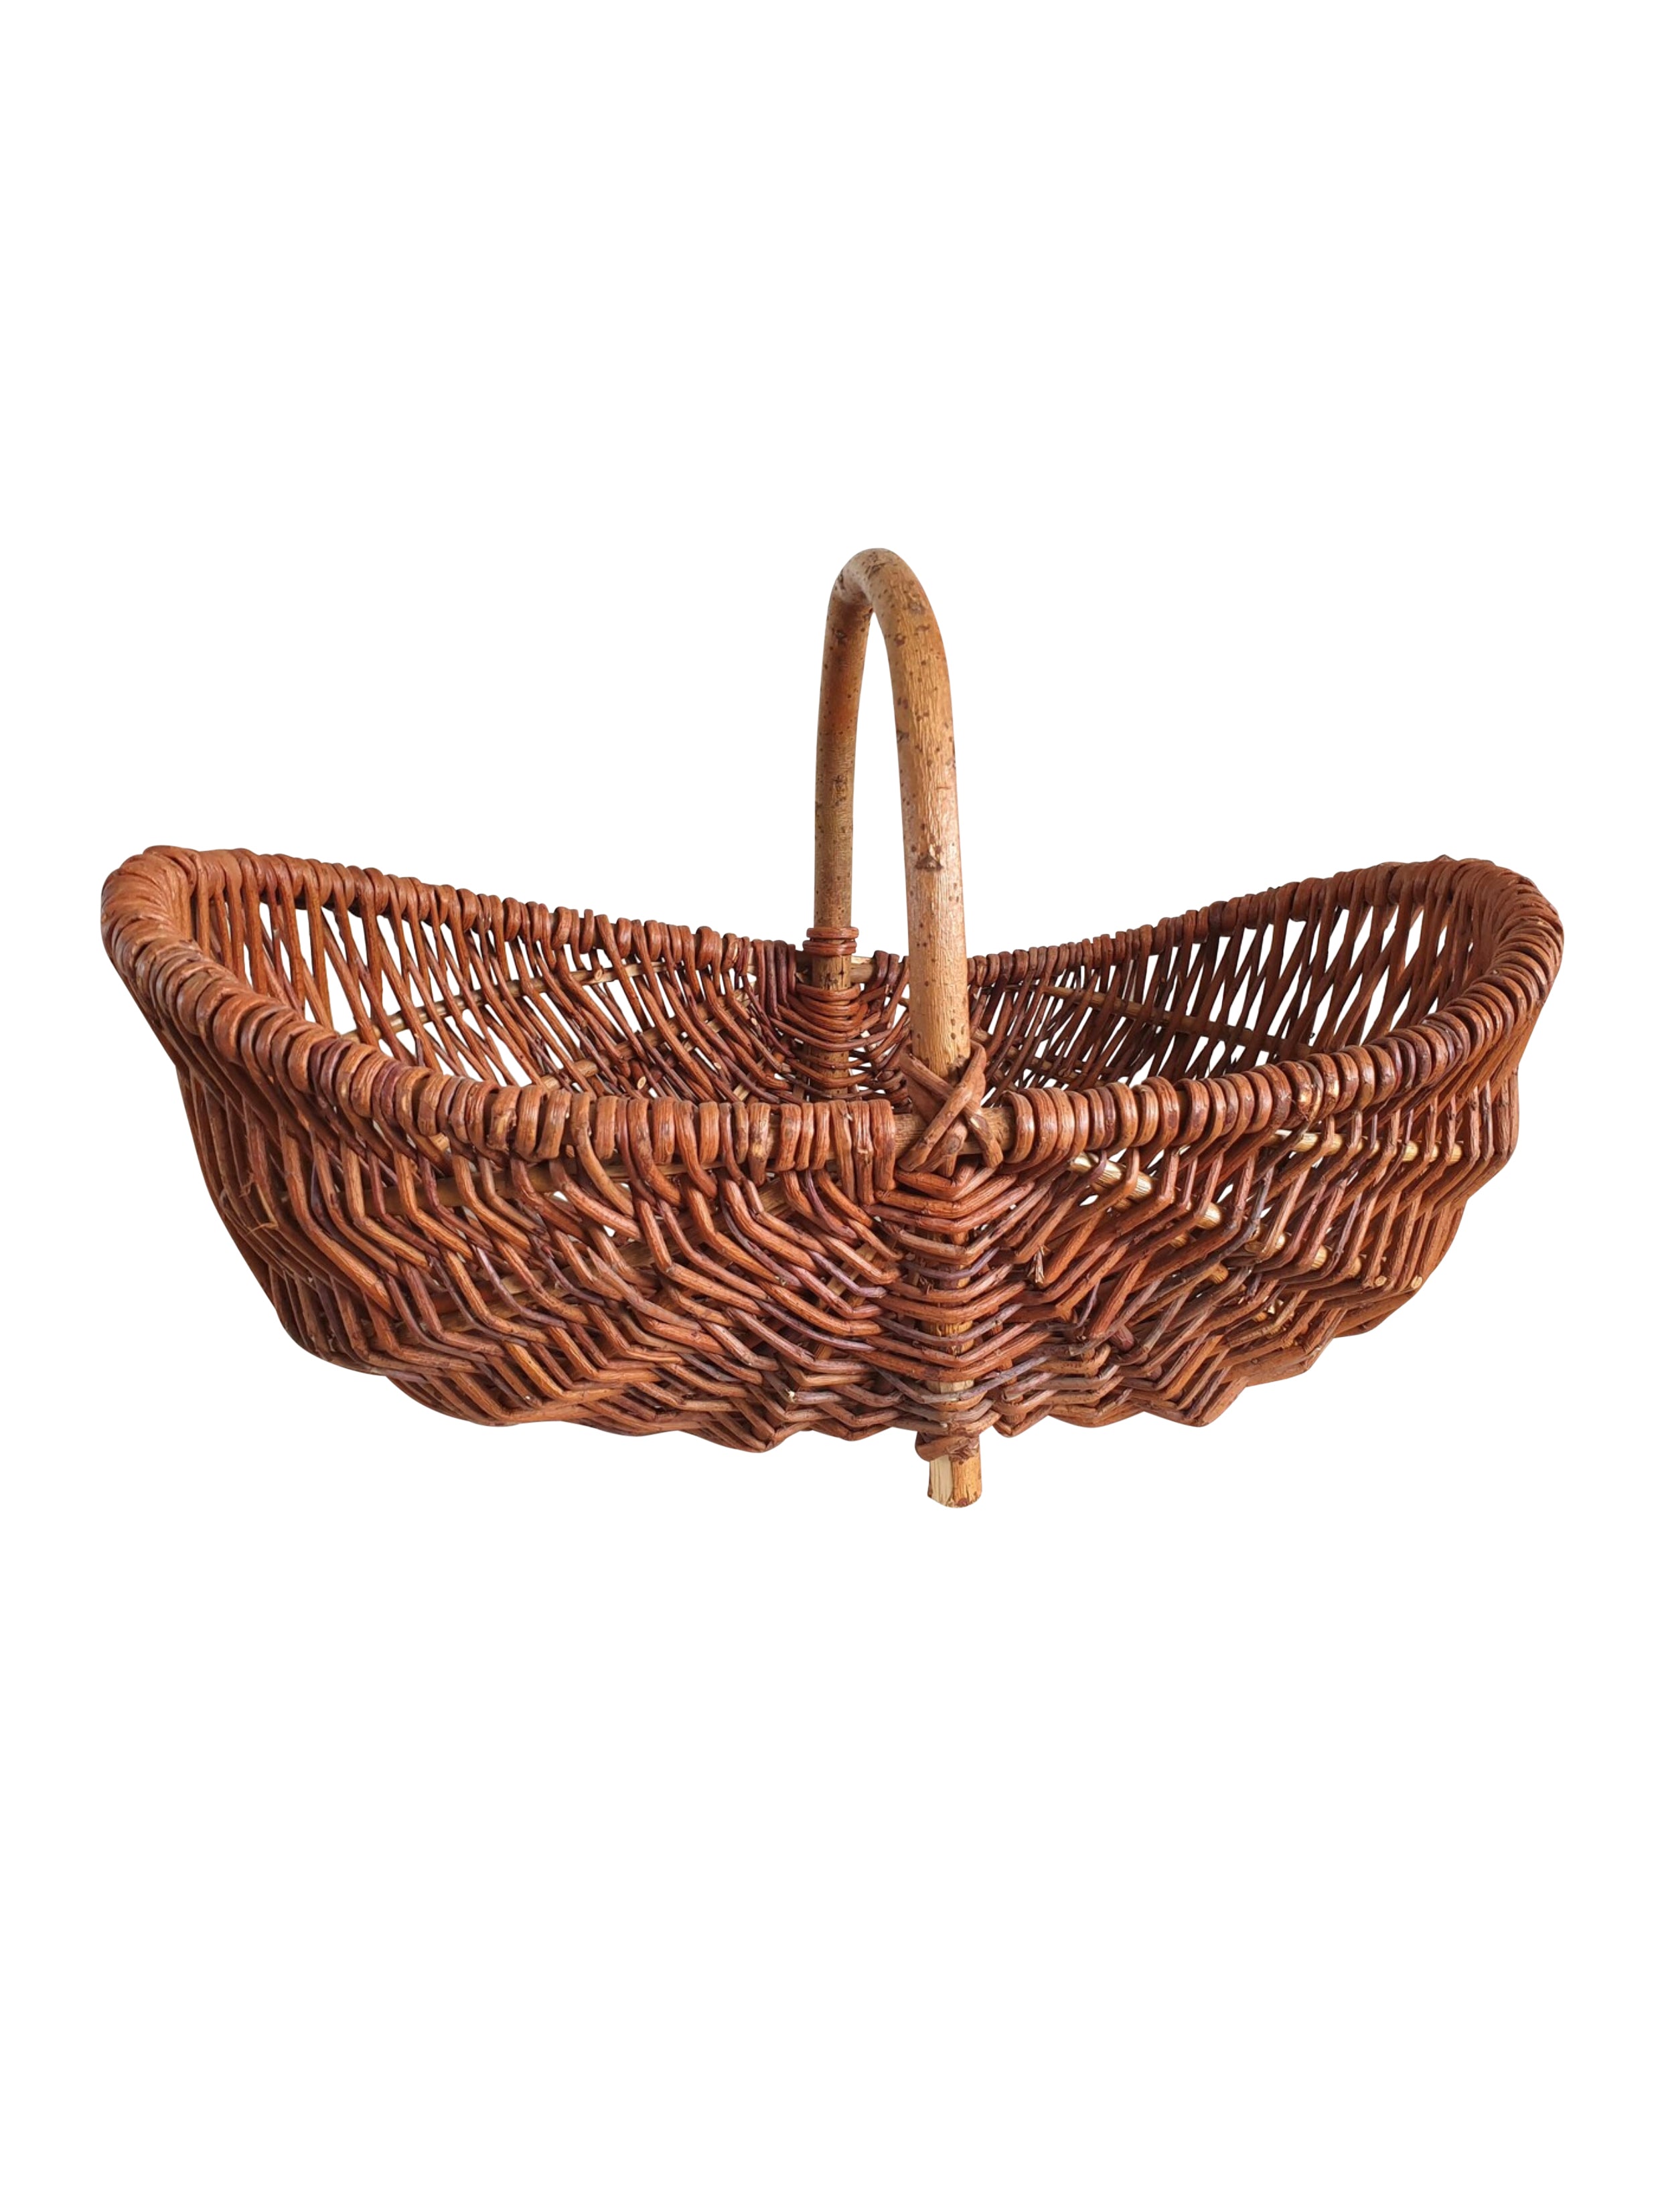 Shop the Vintage 1950s French Market Basket at Weston Table